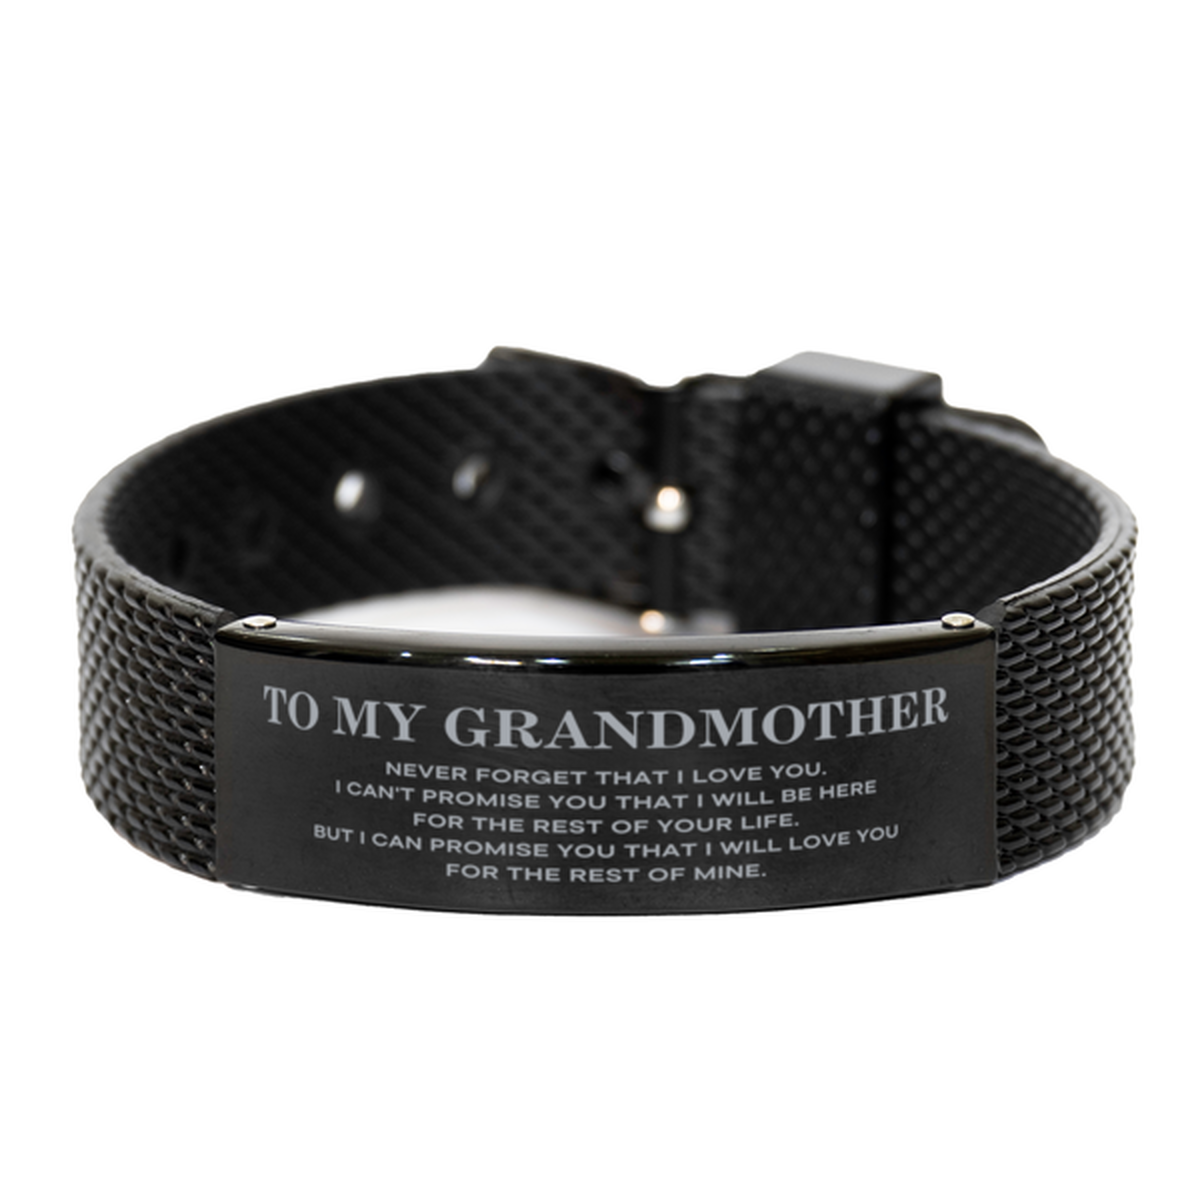 To My Grandmother Gifts, I will love you for the rest of mine, Love Grandmother Bracelet, Birthday Christmas Unique Black Shark Mesh Bracelet For Grandmother